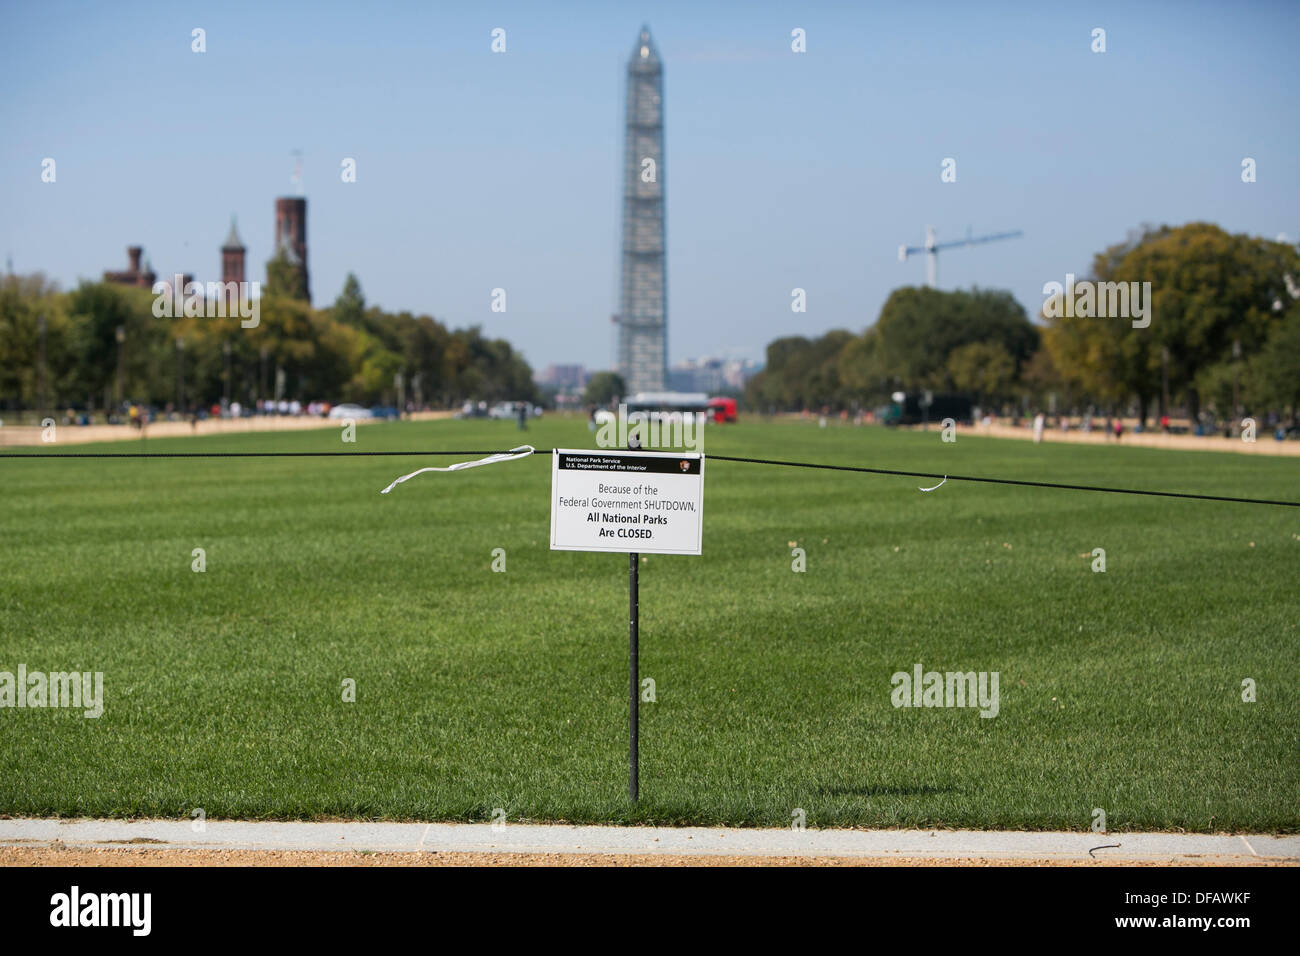 Washington DC, USA. 01st Oct, 2013. A portion of the National Mall with the Washington Monument in the background is closed due to the government shutdown on October 1, 2013 in Washington, DC. The US Federal Government shut down at midnight after Congress was unable to pass a funding bill over a dispute to defund Obamacare. Credit:  Kristoffer Tripplaar/Alamy Live News Stock Photo